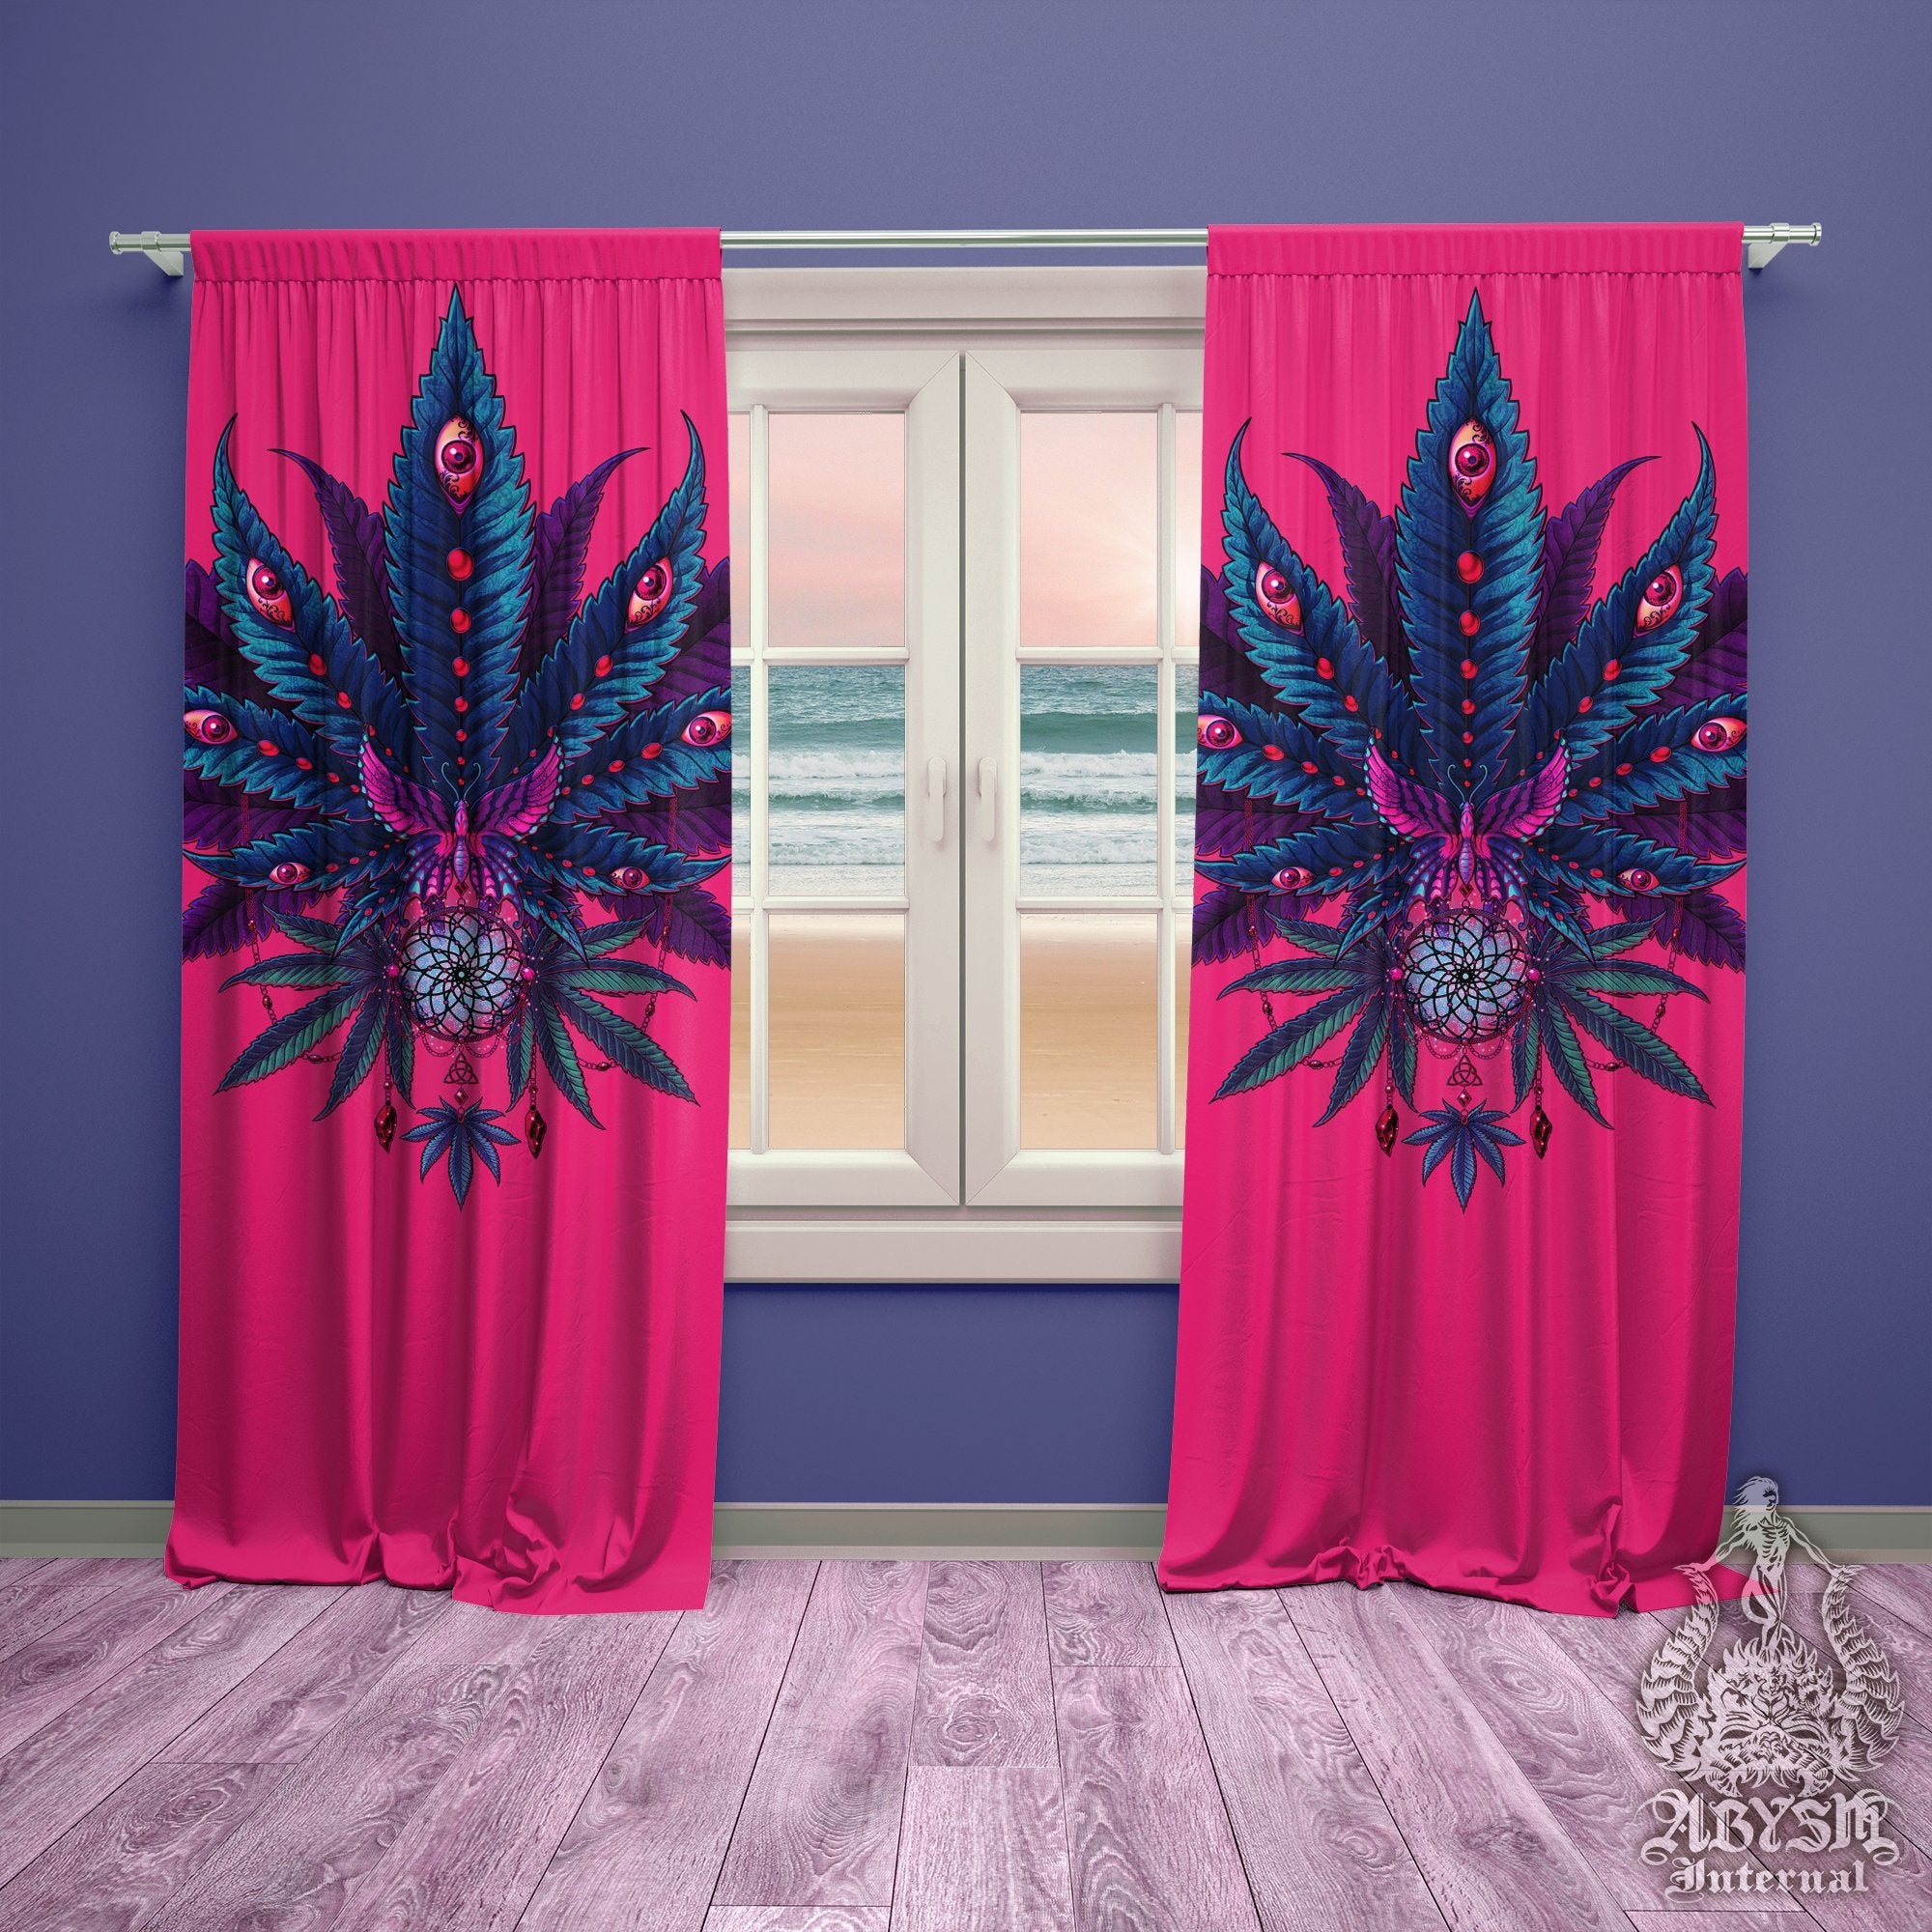 Weed Blackout Curtains, Cannabis Home and Shop Decor, Long Window Panels, Psychedelic Print, 420 Room 80s Art - Neon I - Abysm Internal